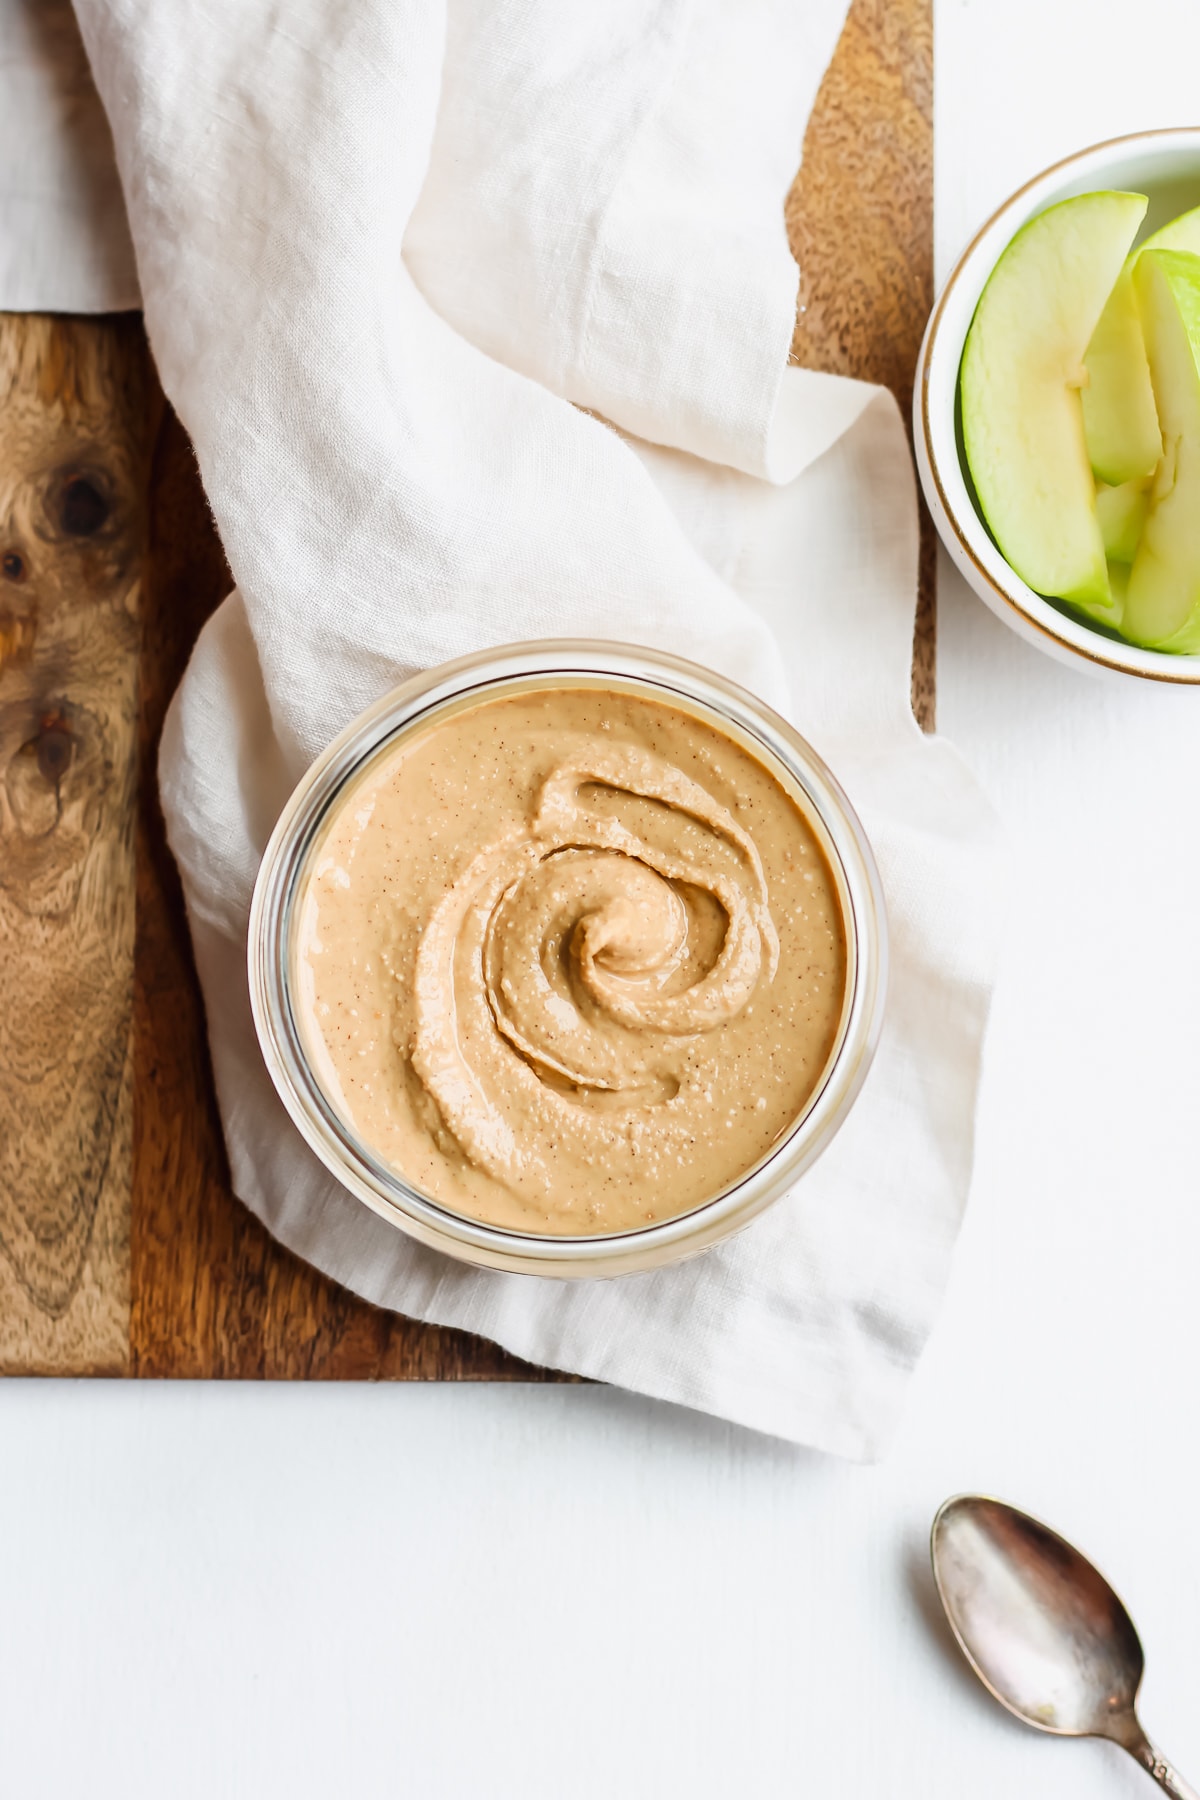 Jar of homemade cashew butter on a wooden board with a bowl of apples.